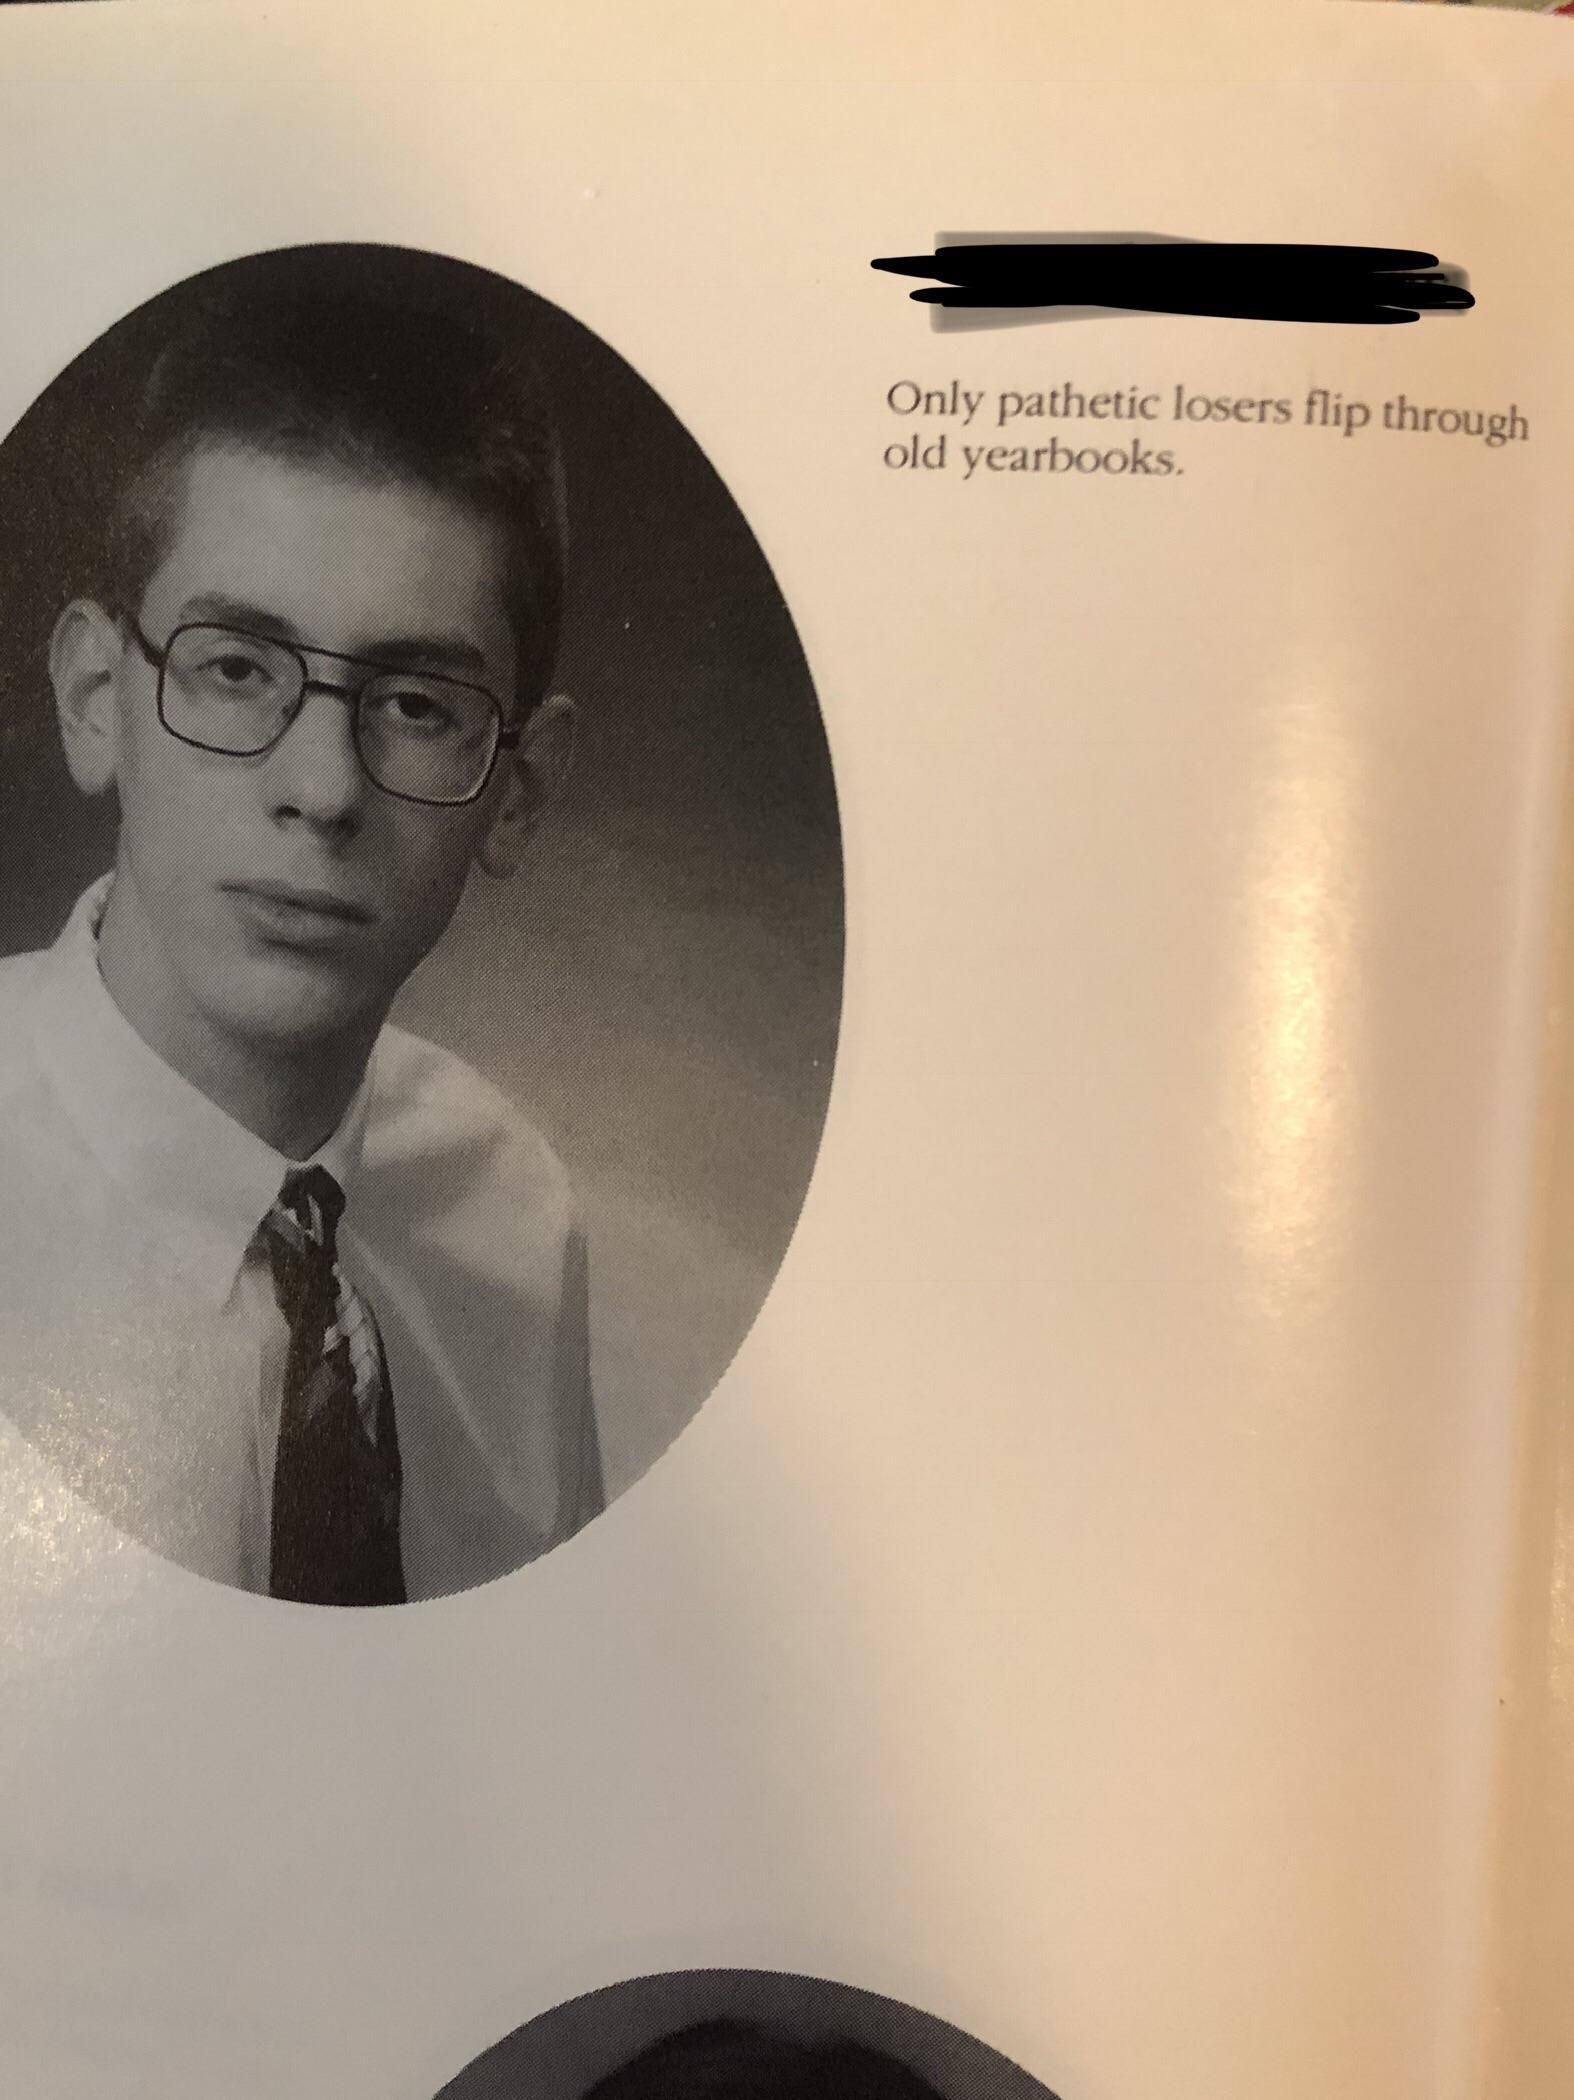 1999 was a savage year for high school quotes